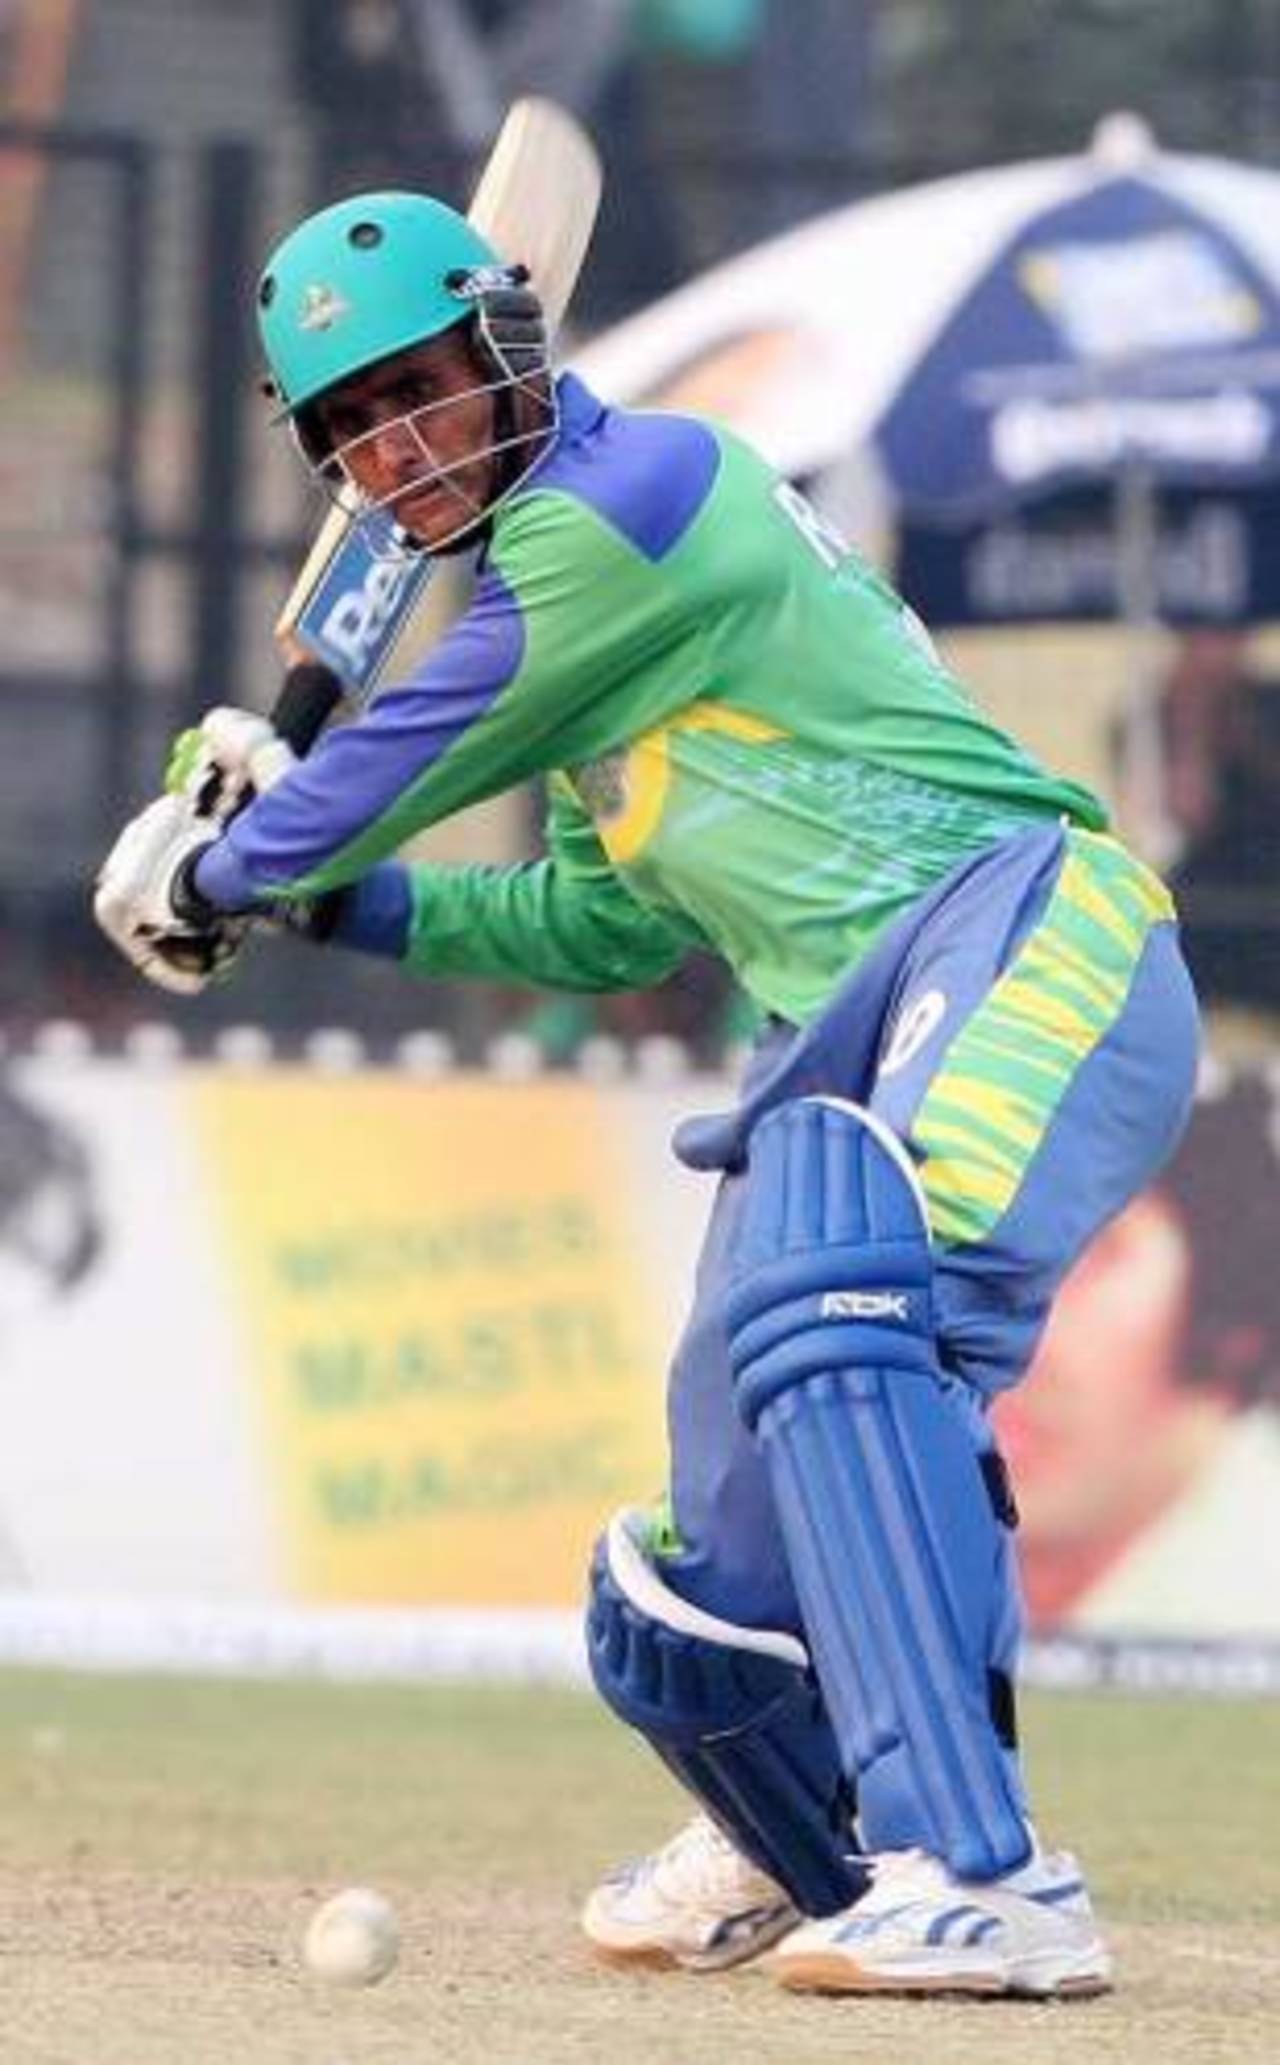 Abdul Razzaq is likely to become the first former ICL player to return to international cricket&nbsp;&nbsp;&bull;&nbsp;&nbsp;ICL